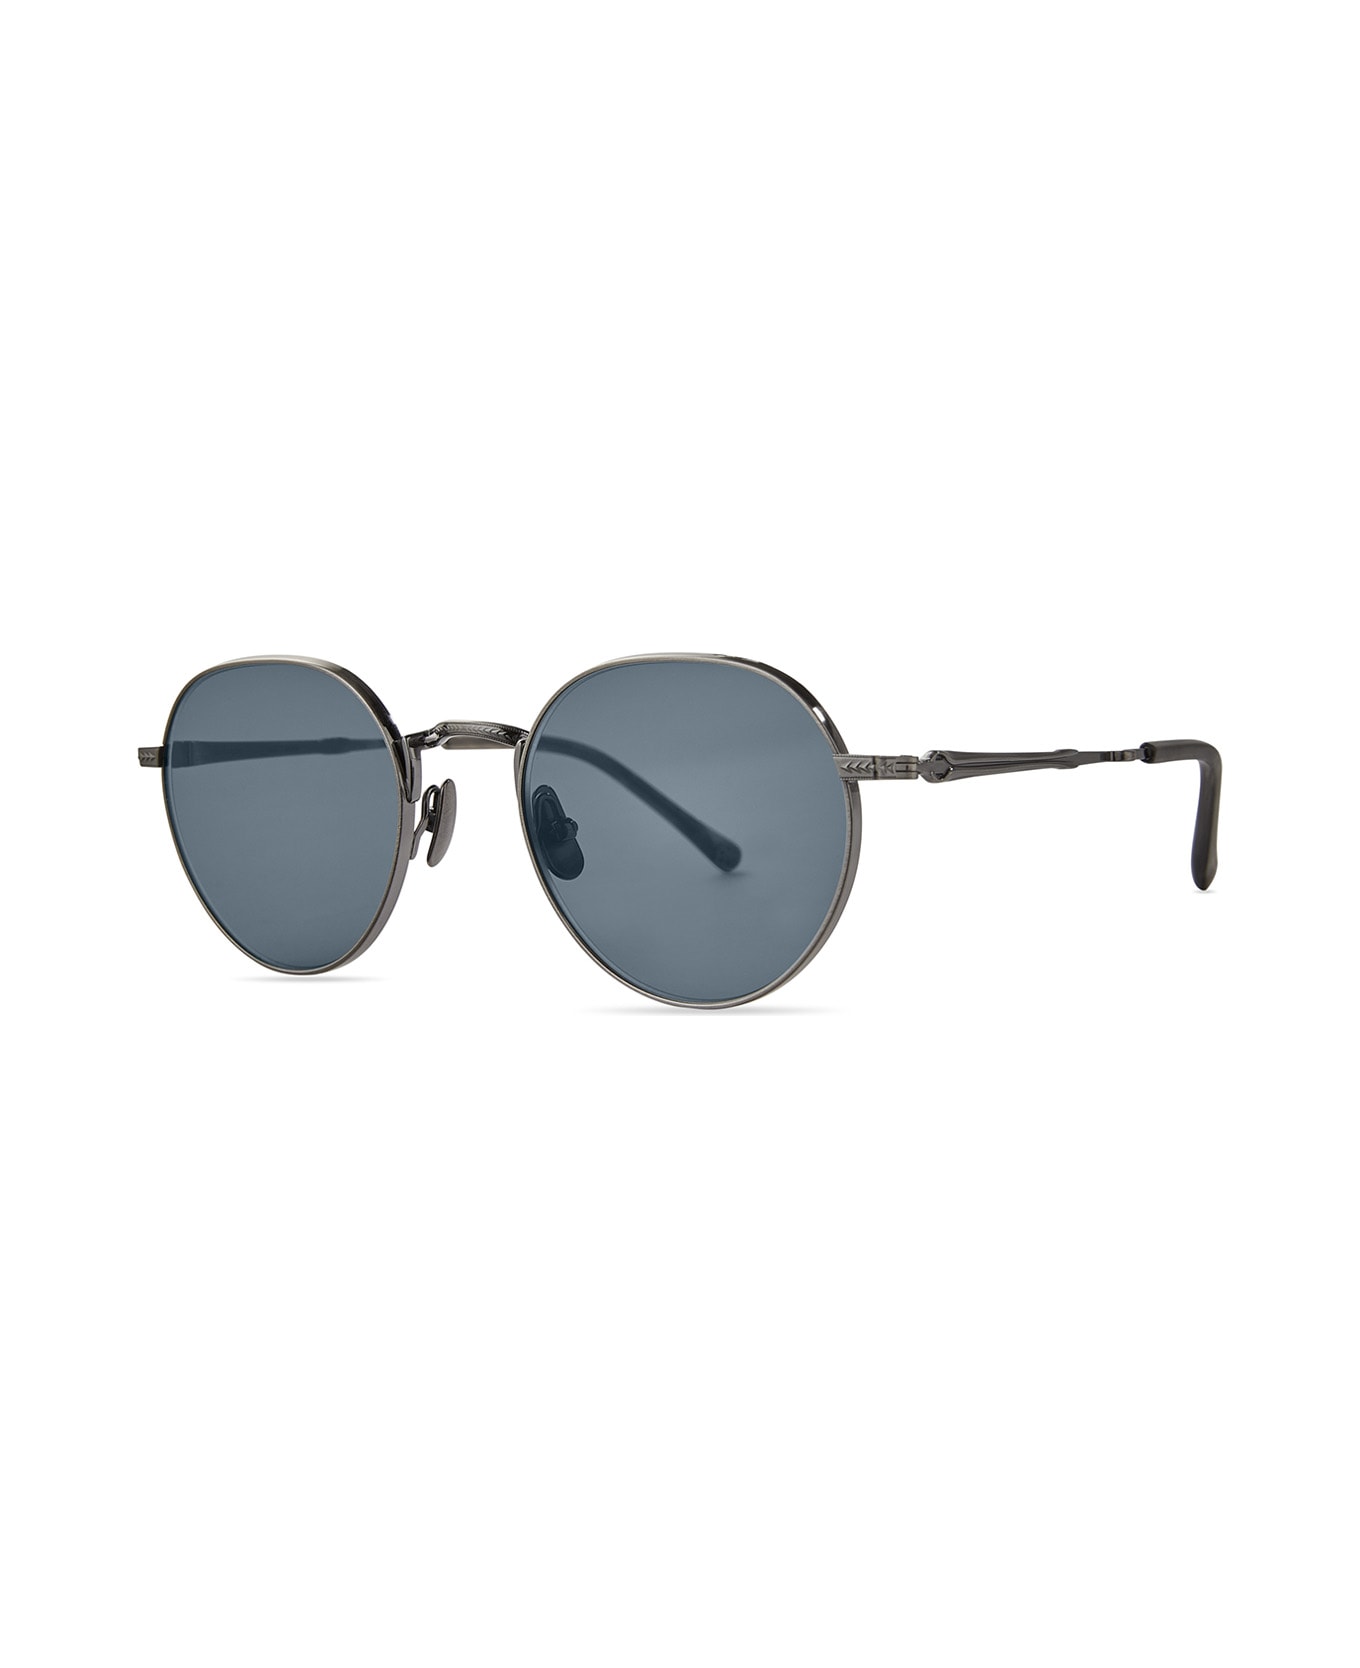 Mr. Leight Hachi S Pewter-matte Coldwater/semi-flat Presidential Blue Sunglasses - Pewter-Matte Coldwater/Semi-Flat Presidential Blue サングラス